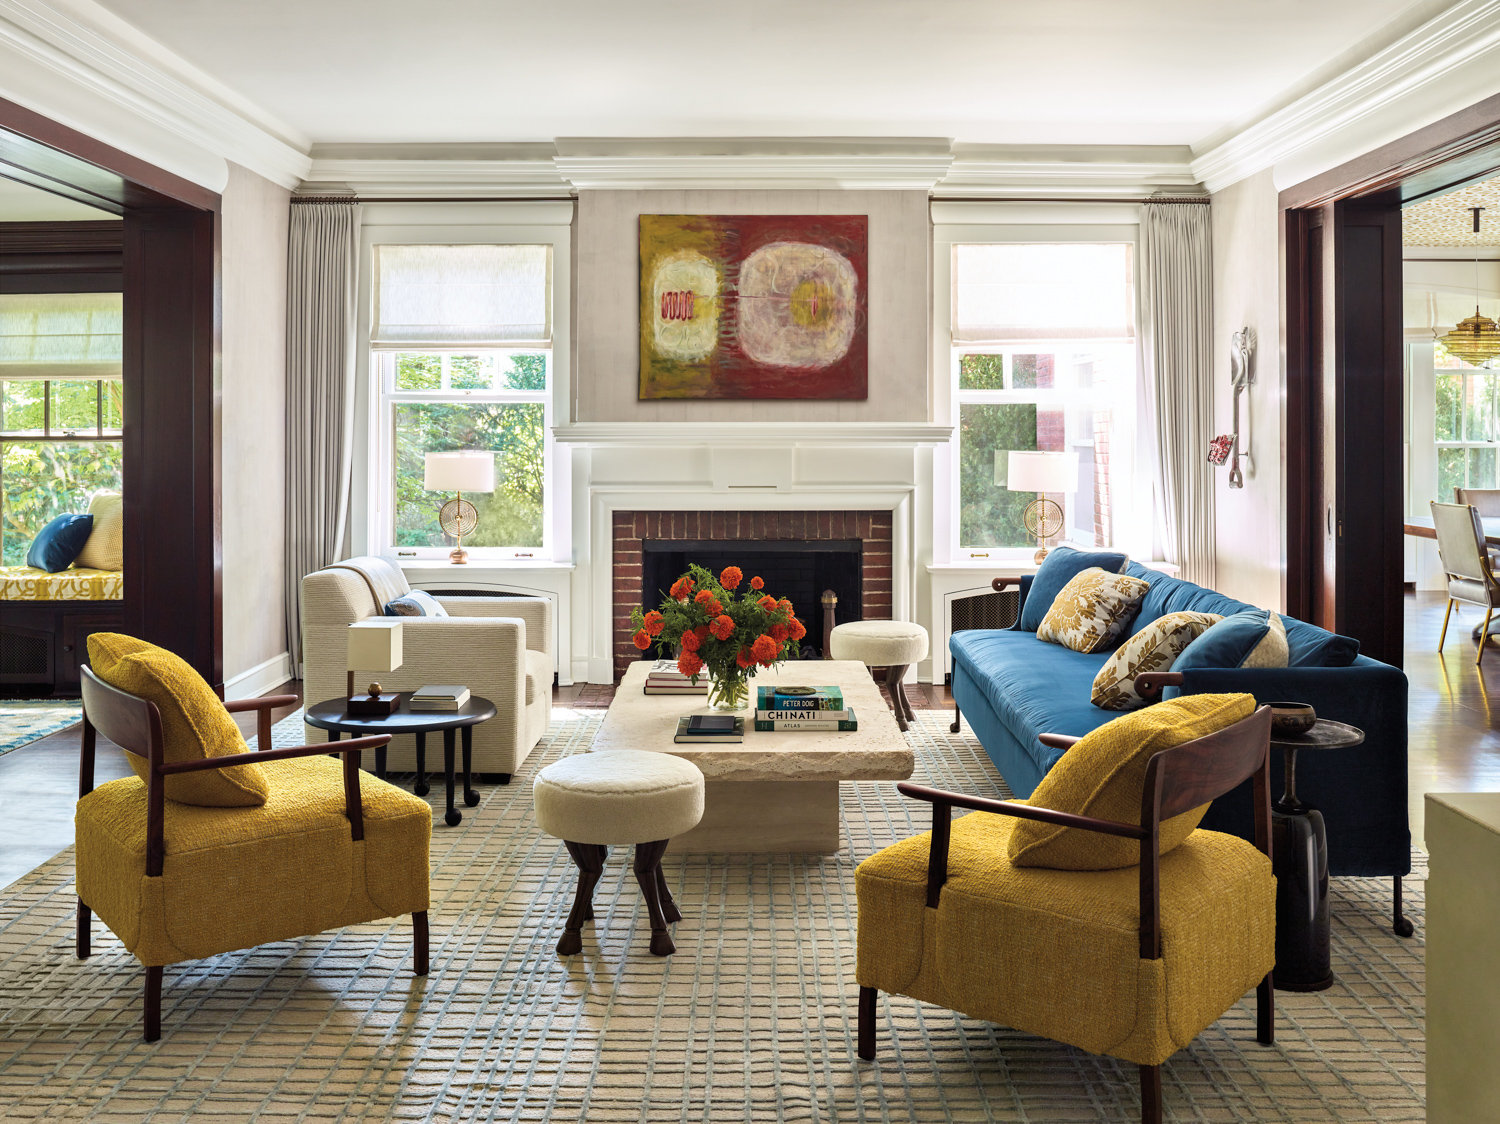 A living room with a brick fireplace, a blue sofa and a pair of yellow chairs.